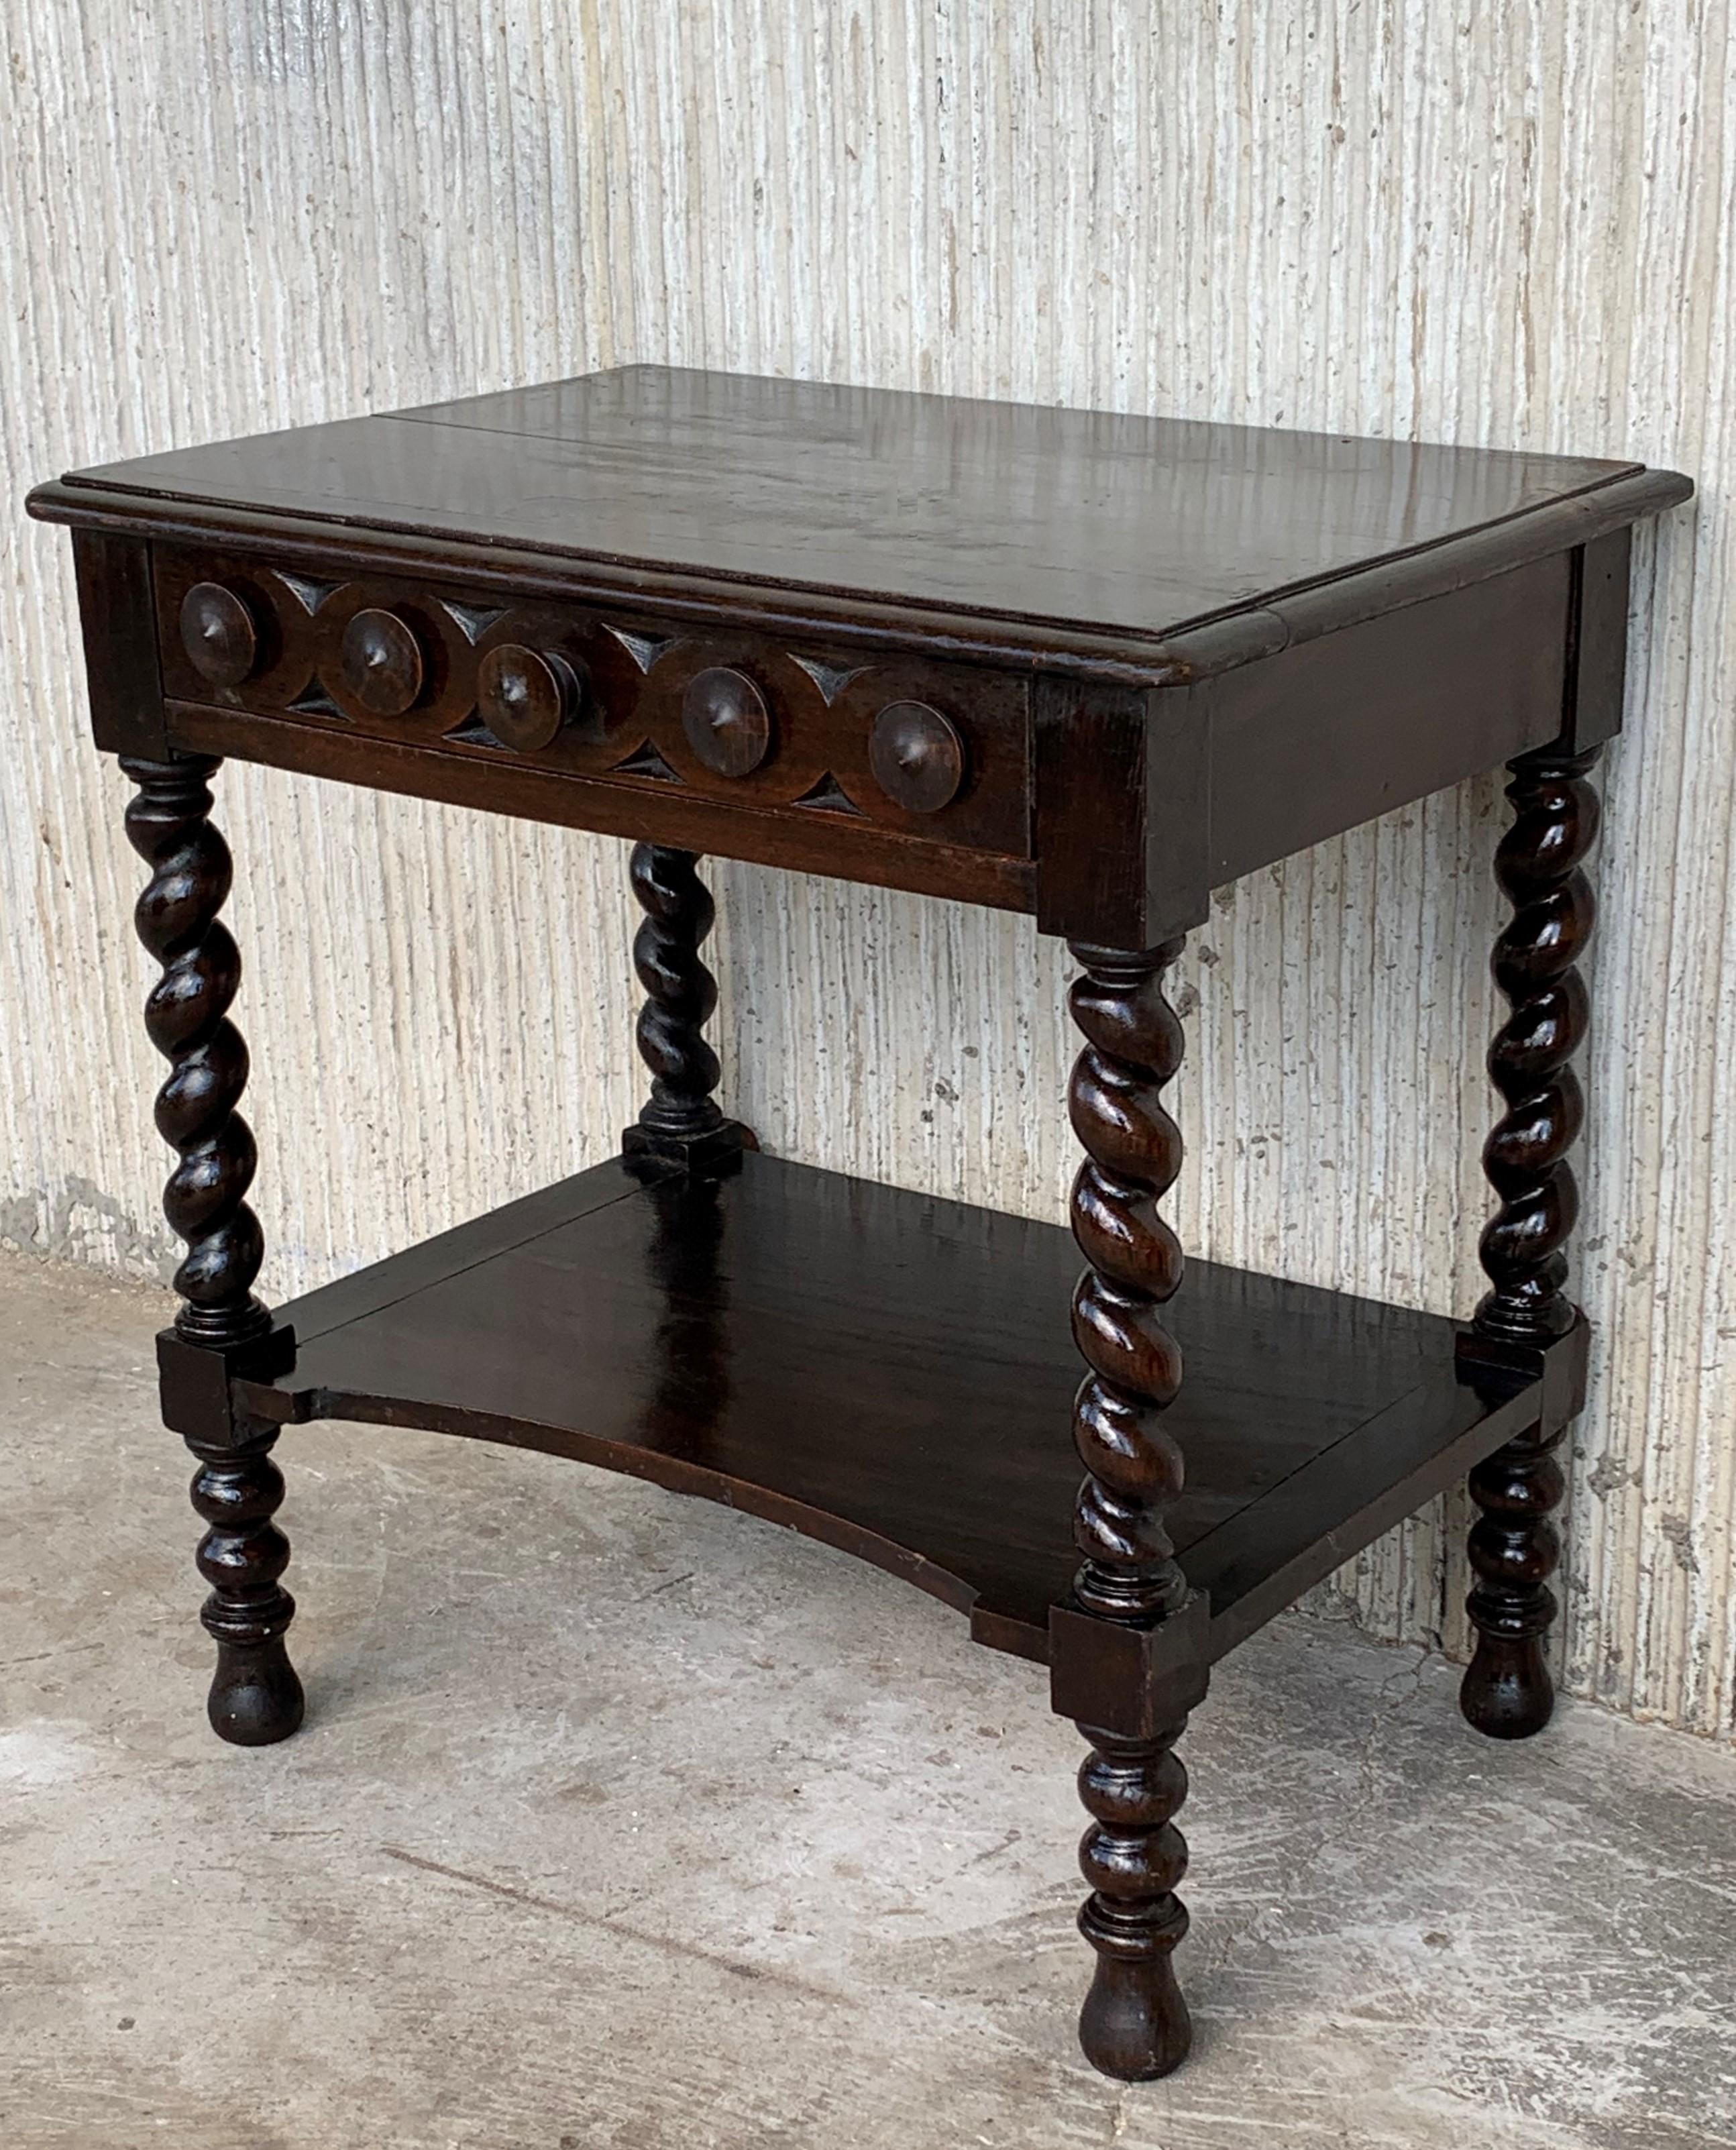 20th century pair of Catalan, Spanish nightstands with carved drawer and open shelf
The tables are made of a walnut of this region 
Beautiful and heavy nightstands.
 